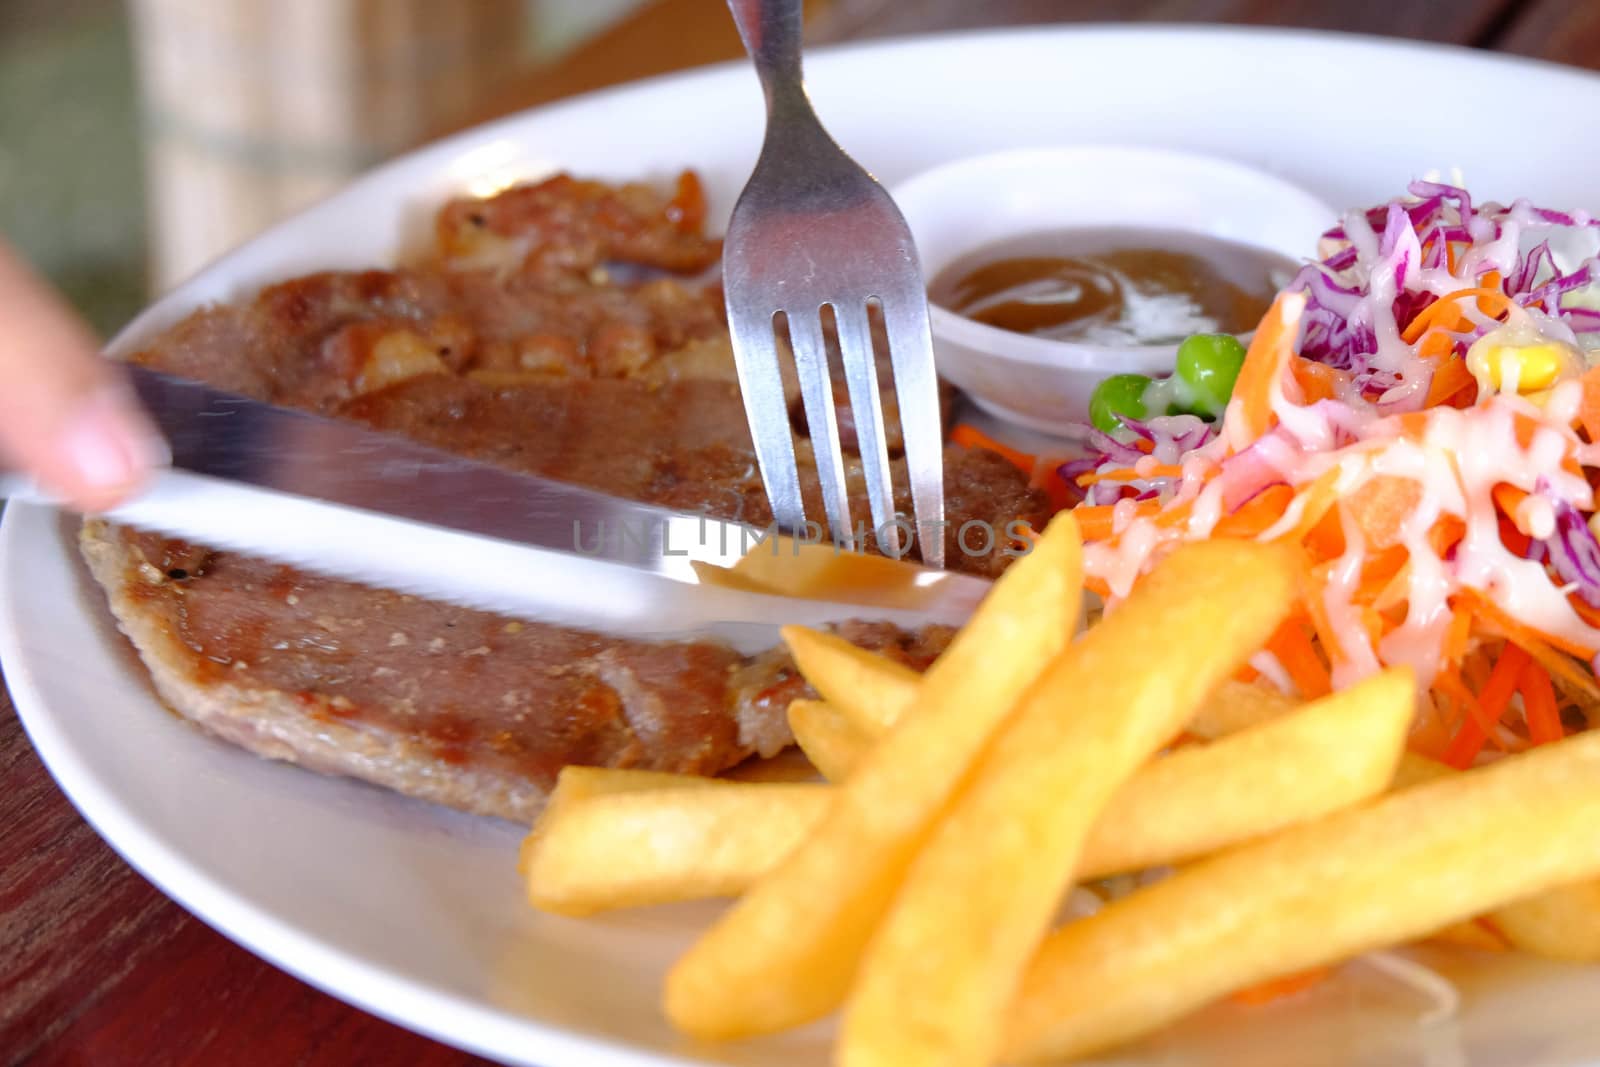 Close up of a cutting a fillet steak with french fries and veget by e22xua